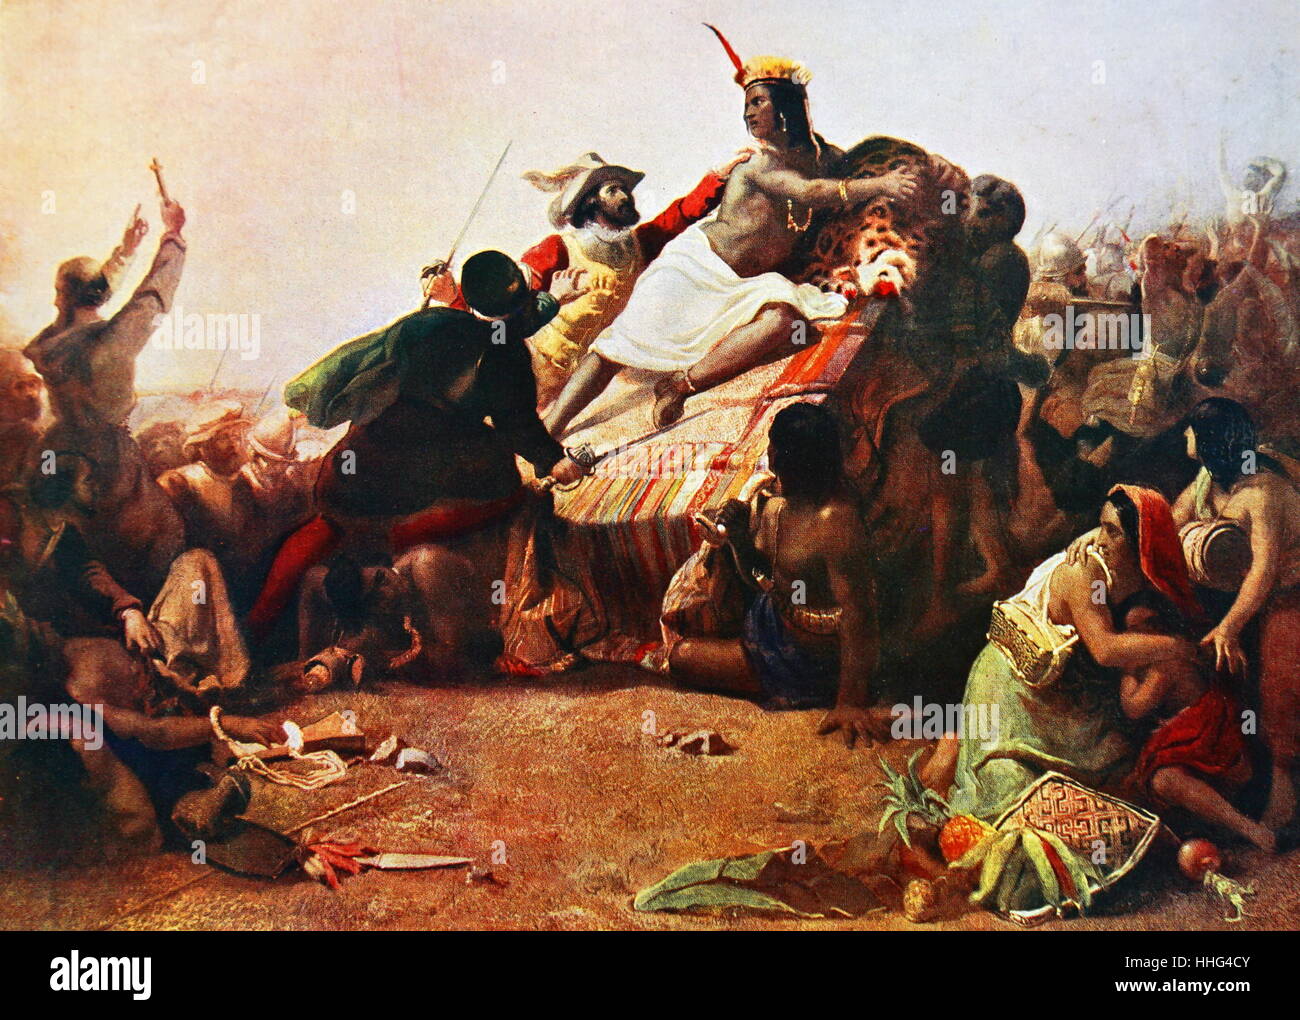 Pizarro Seizing the Inca of Peru John Everett Millais. On November 16, 1532, Atahualpa, lord of the Inca Empire, was attacked and captured by Spanish conquistadors under Francisco Pizarro. Once he was captured, the Spanish forced him to pay a ransom amounting to tons of gold and silver. Although Atahualpa produced the ransom, the Spanish executed him anyway. Stock Photo